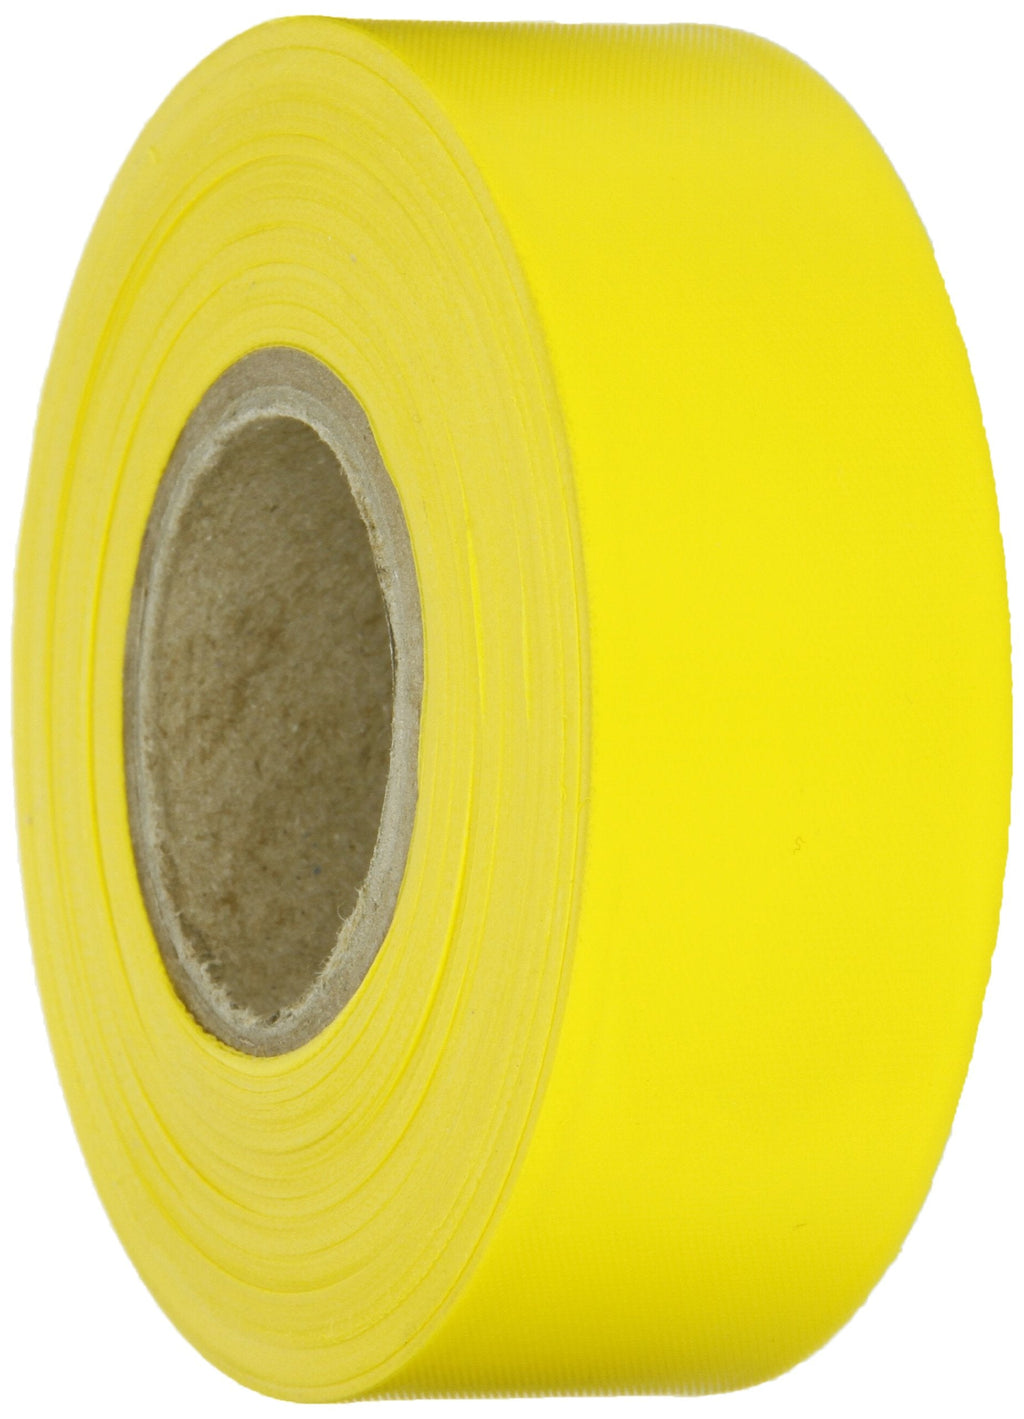  [AUSTRALIA] - Brady Yellow Flagging Tape for Boundaries and Hazardous Areas - Non-Adhesive Tape, 1.188" Width, 300' Length (Pack of 1) - 58347